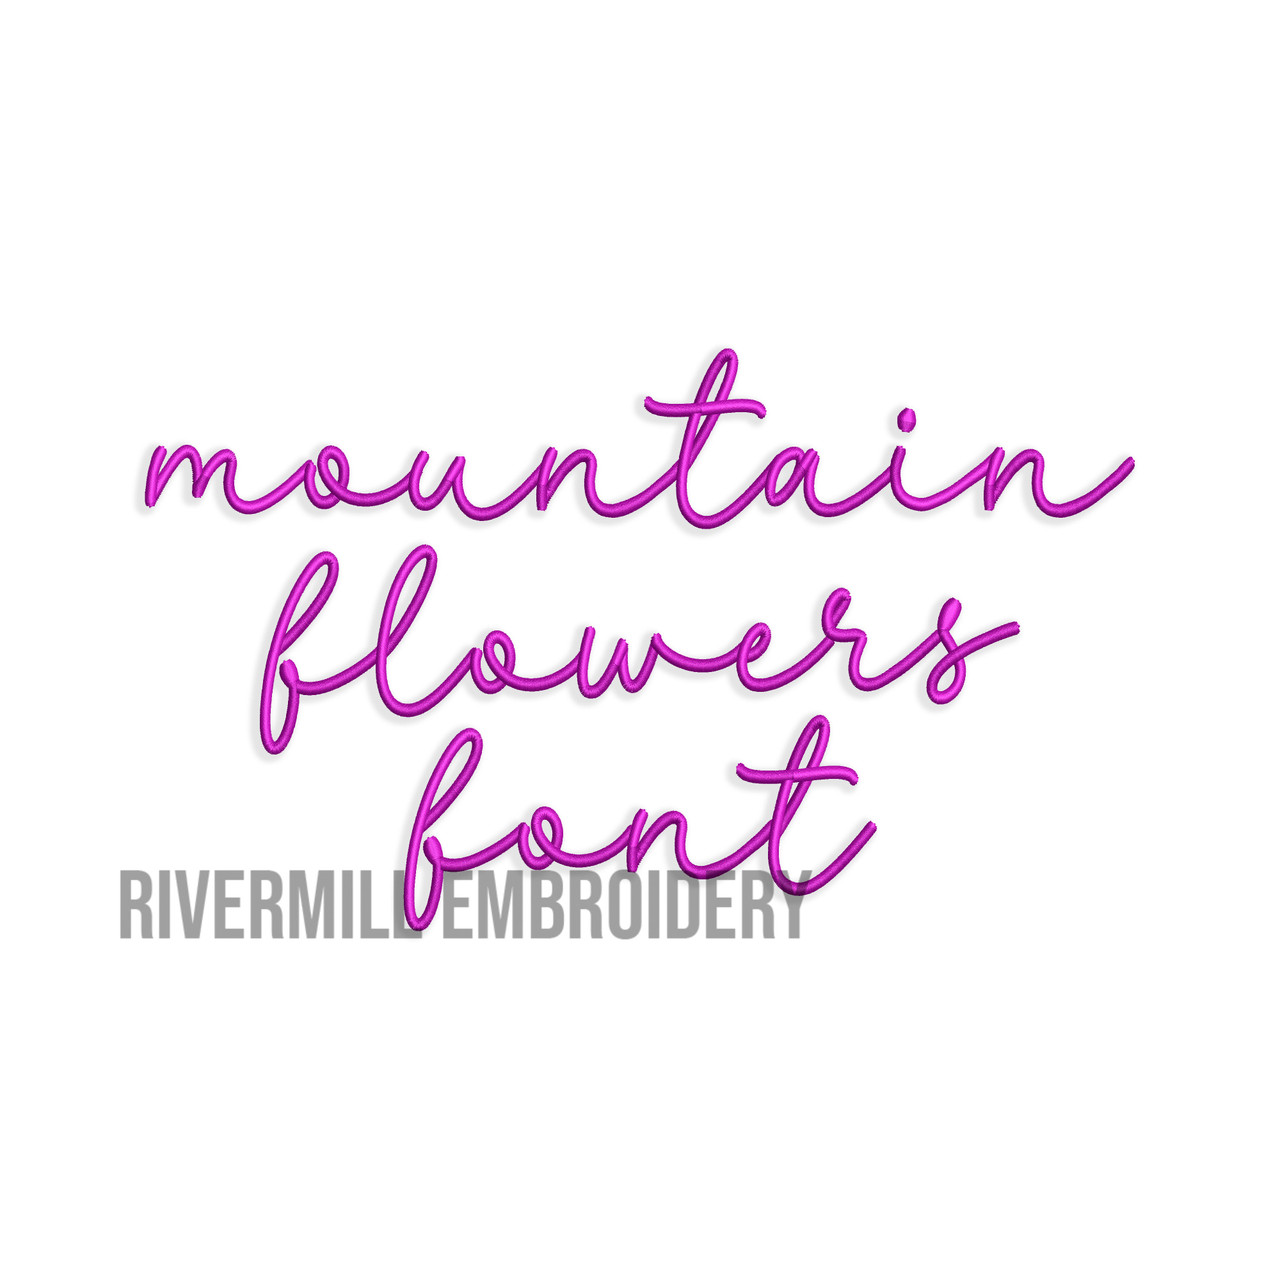 Applique Flower Machine Embroidery Design - Rivermill Embroidery